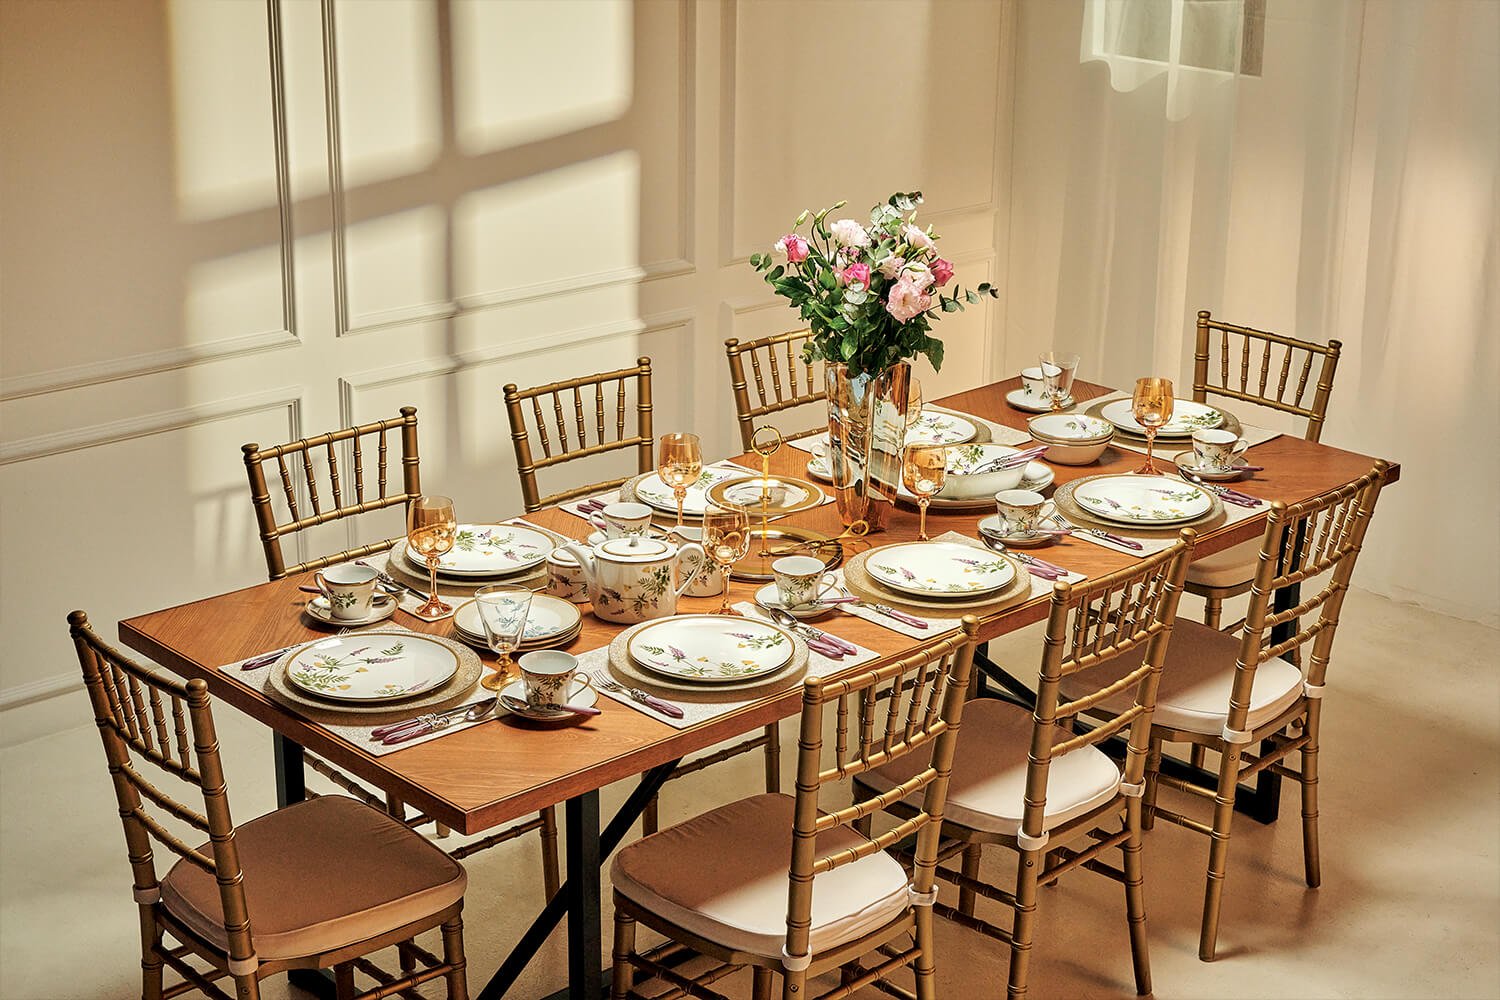 Pamper your Dinner Guests with a Beautiful Table as a Host